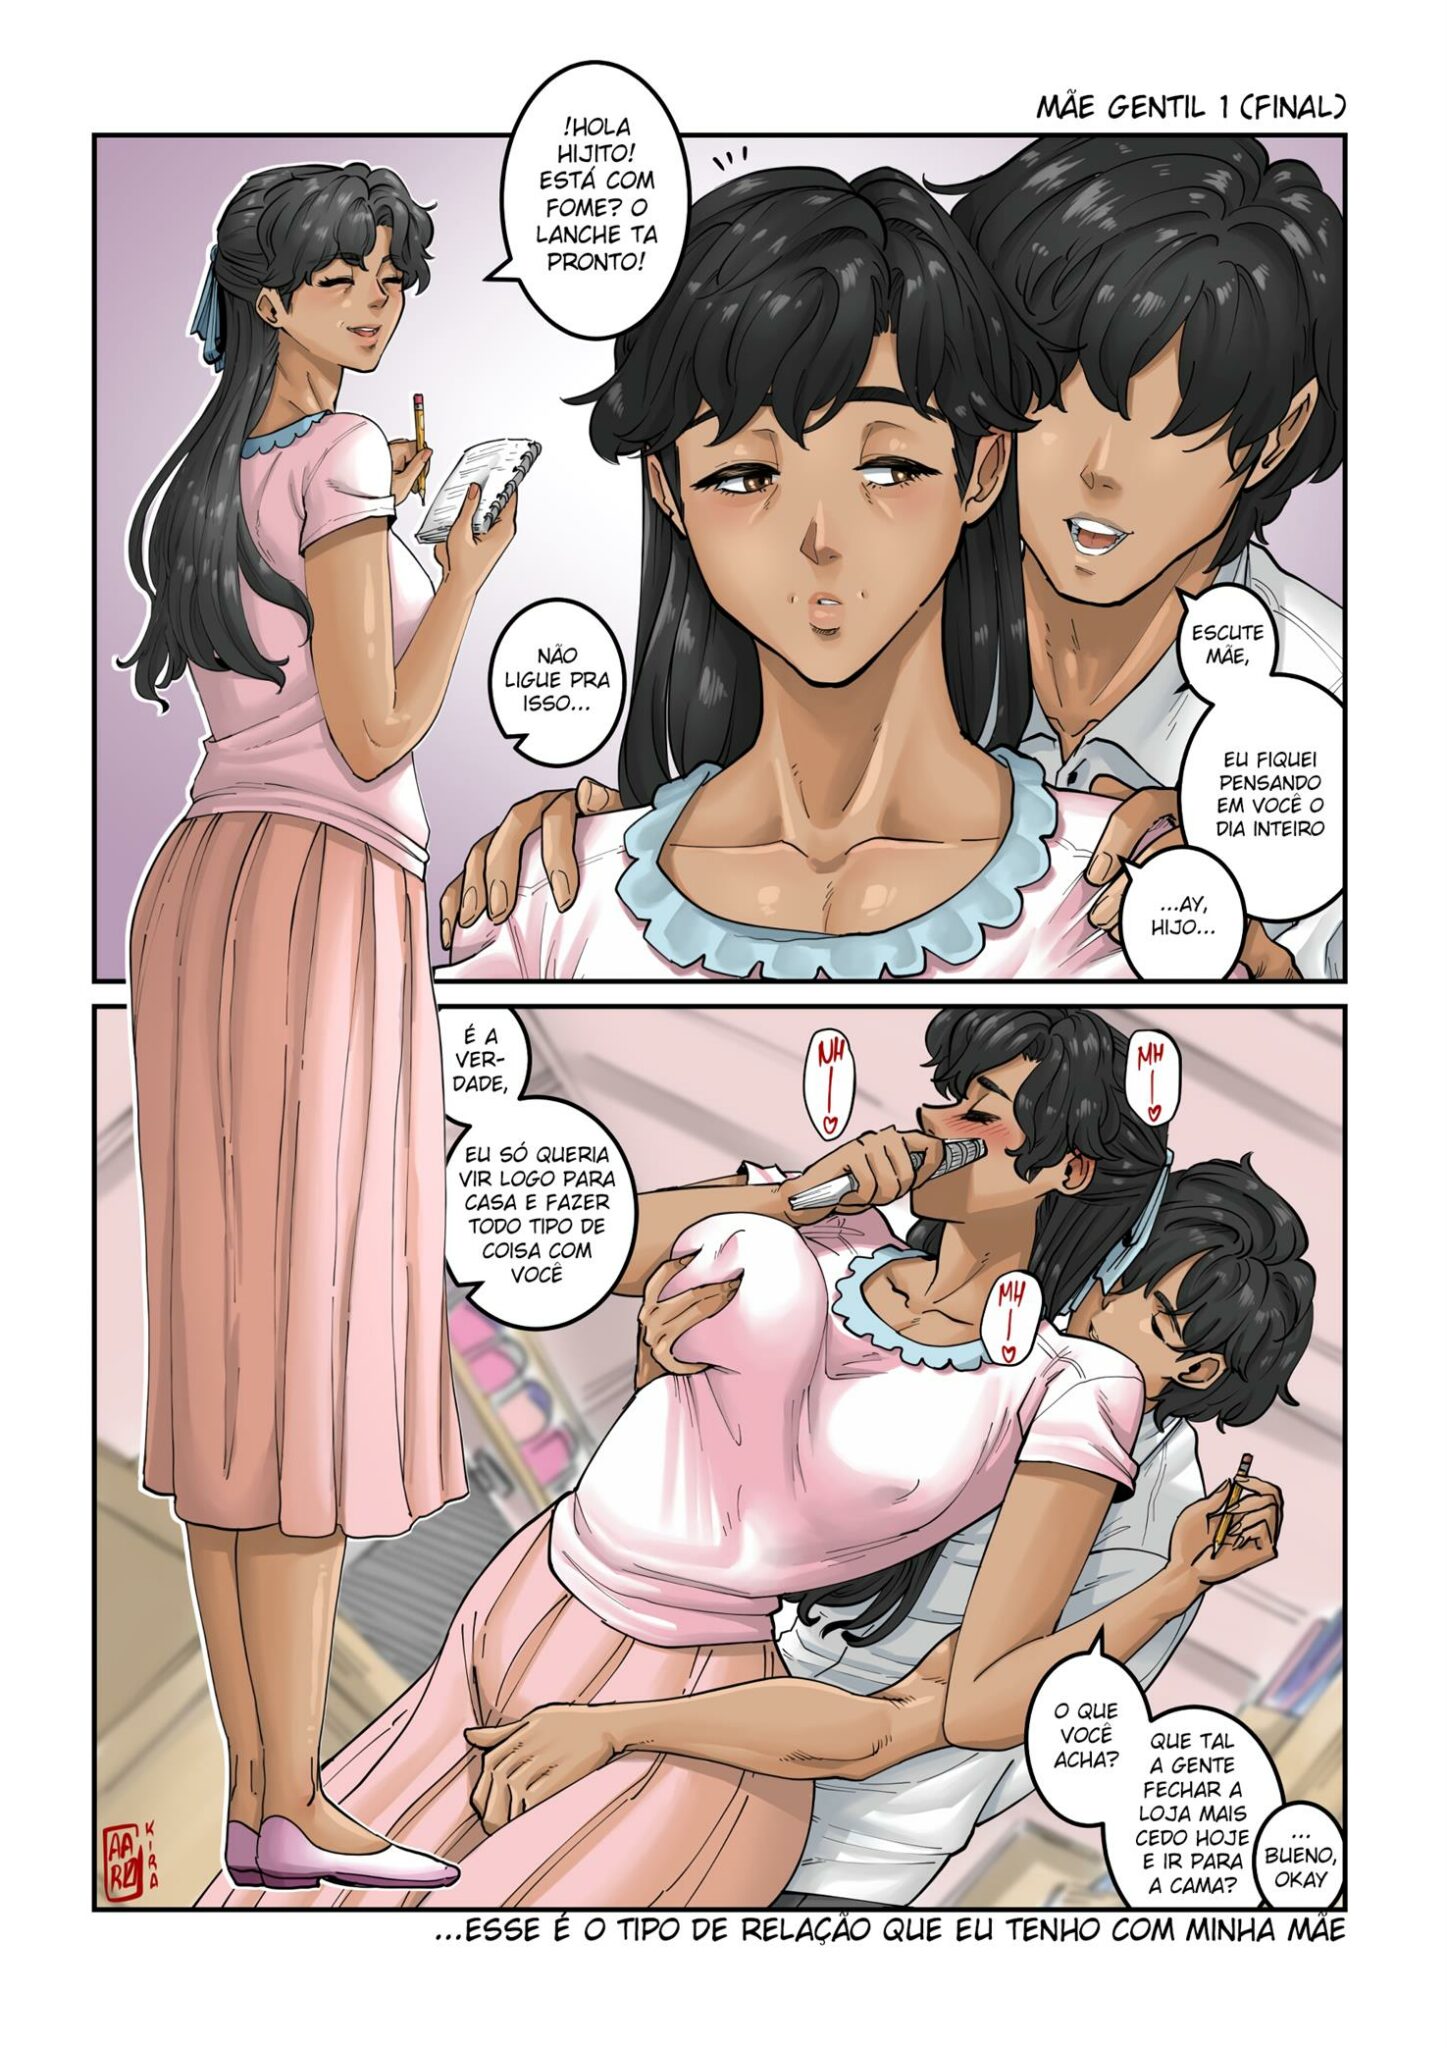 Hentai porn comic the most naughty mom of all